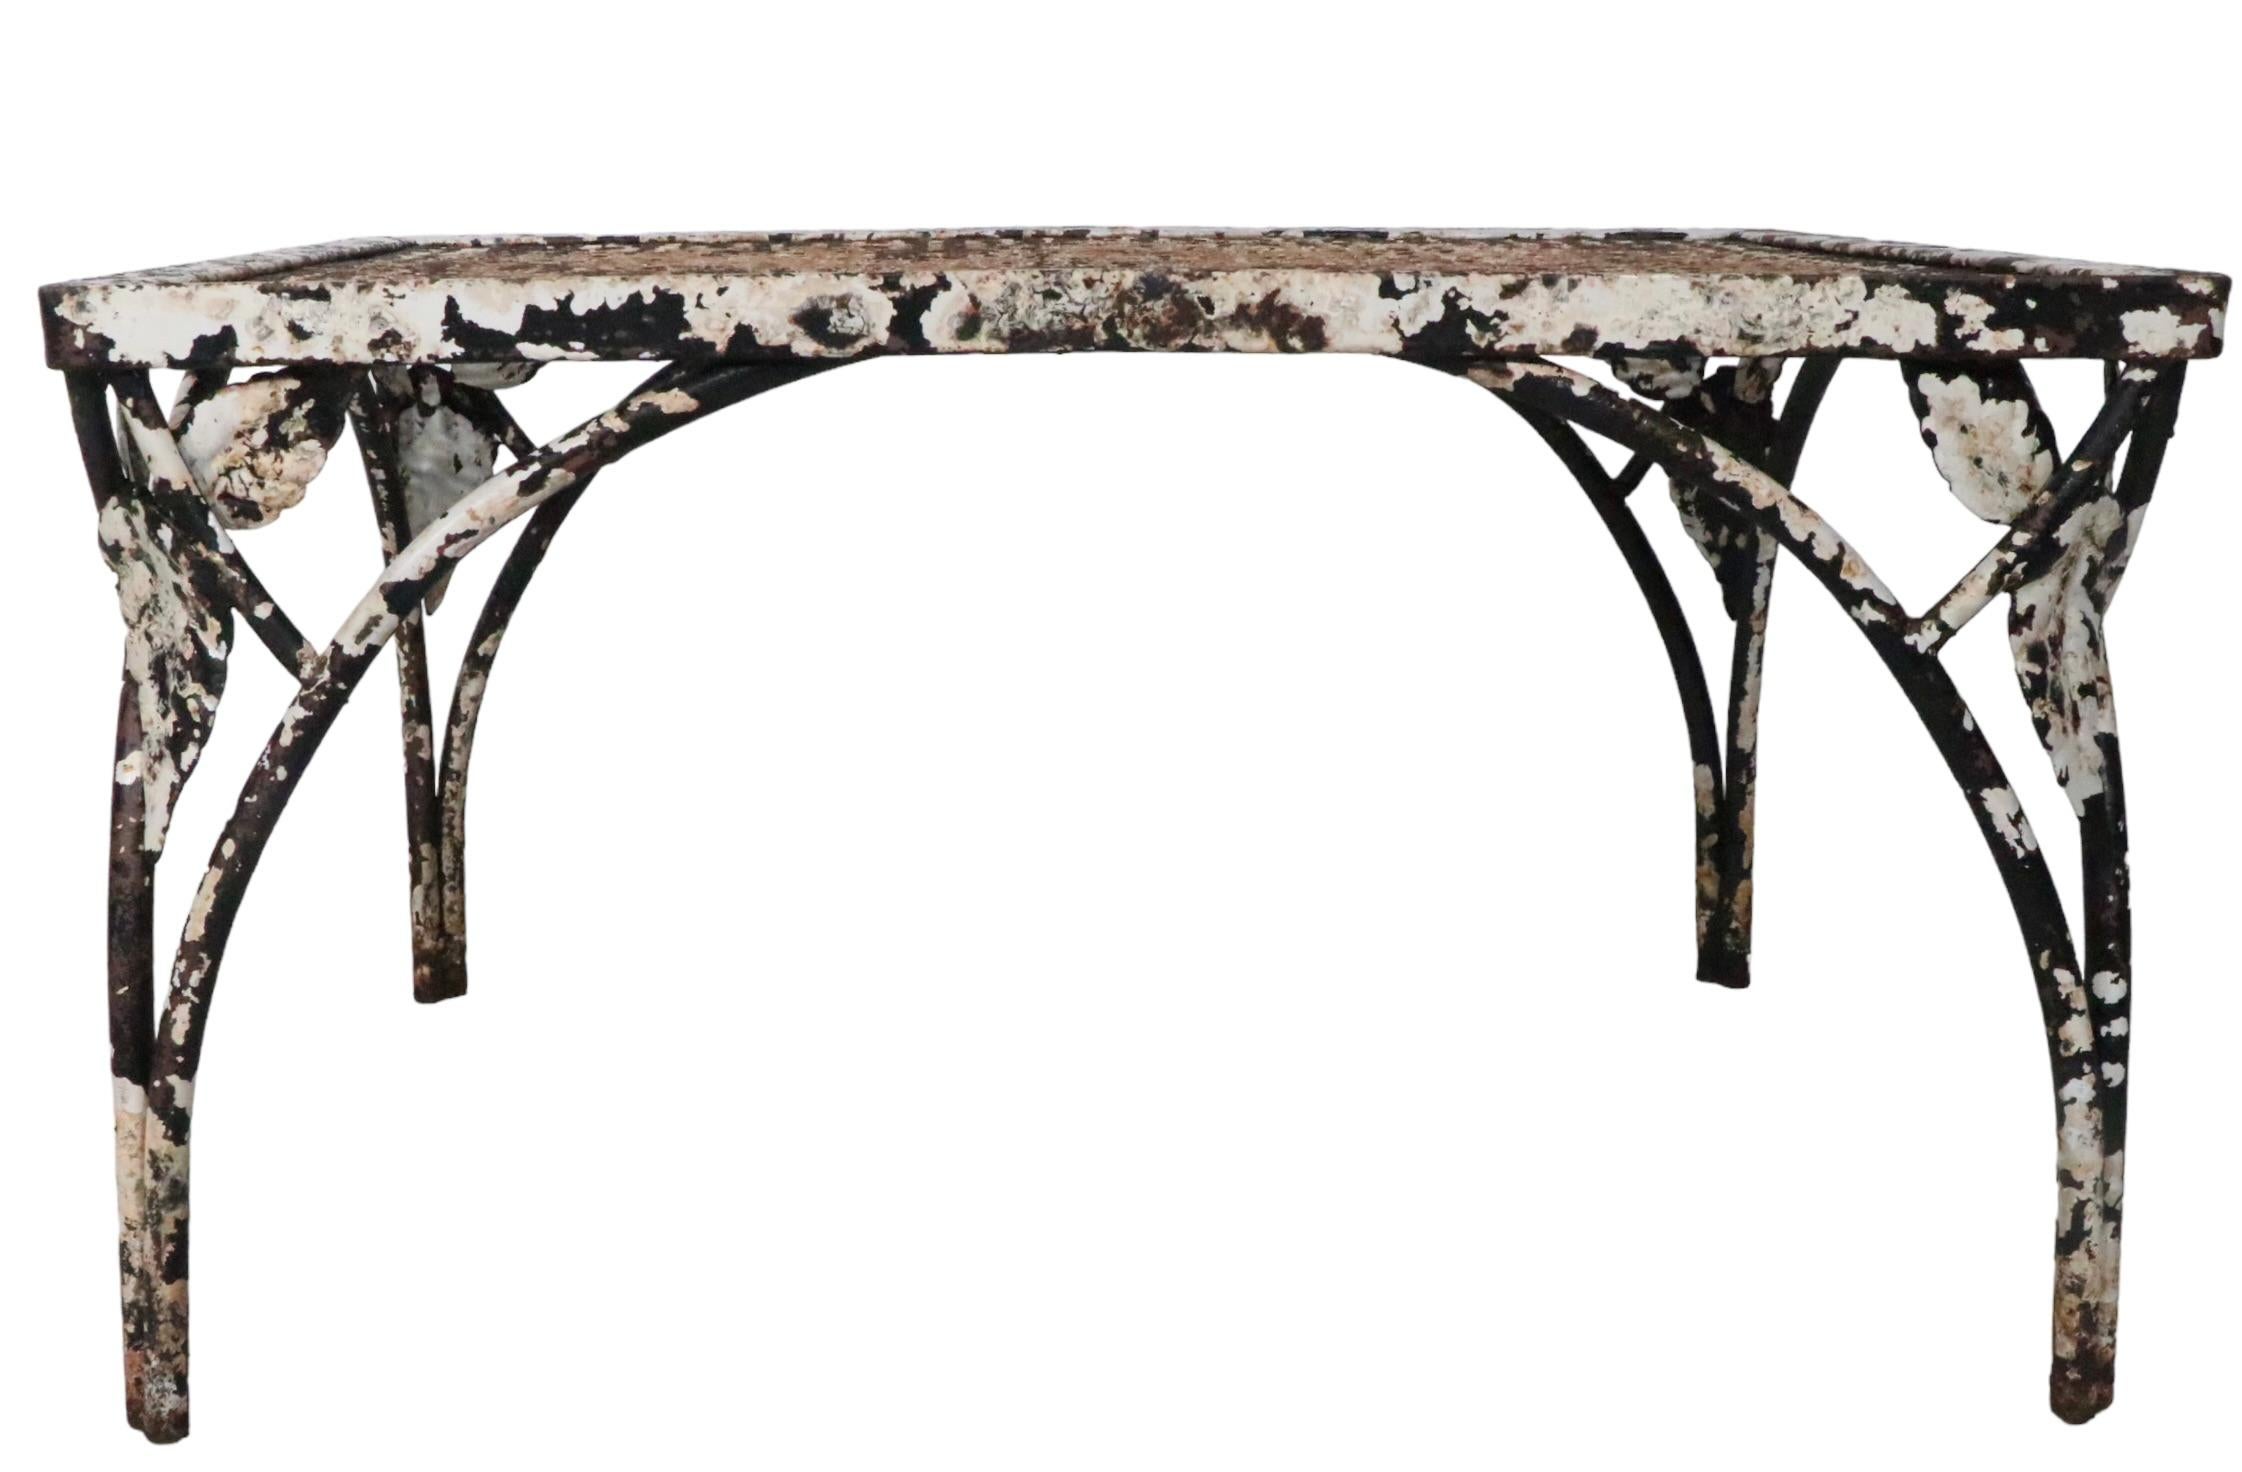 Pair. wrought iron garden, poolside, patio tables attributed to the Woodard Furniture Company, having wrought iron bases with foliate decorations, and metal mesh tops. Both tables are structurally sound and sturdy, both show considerable cosmetic